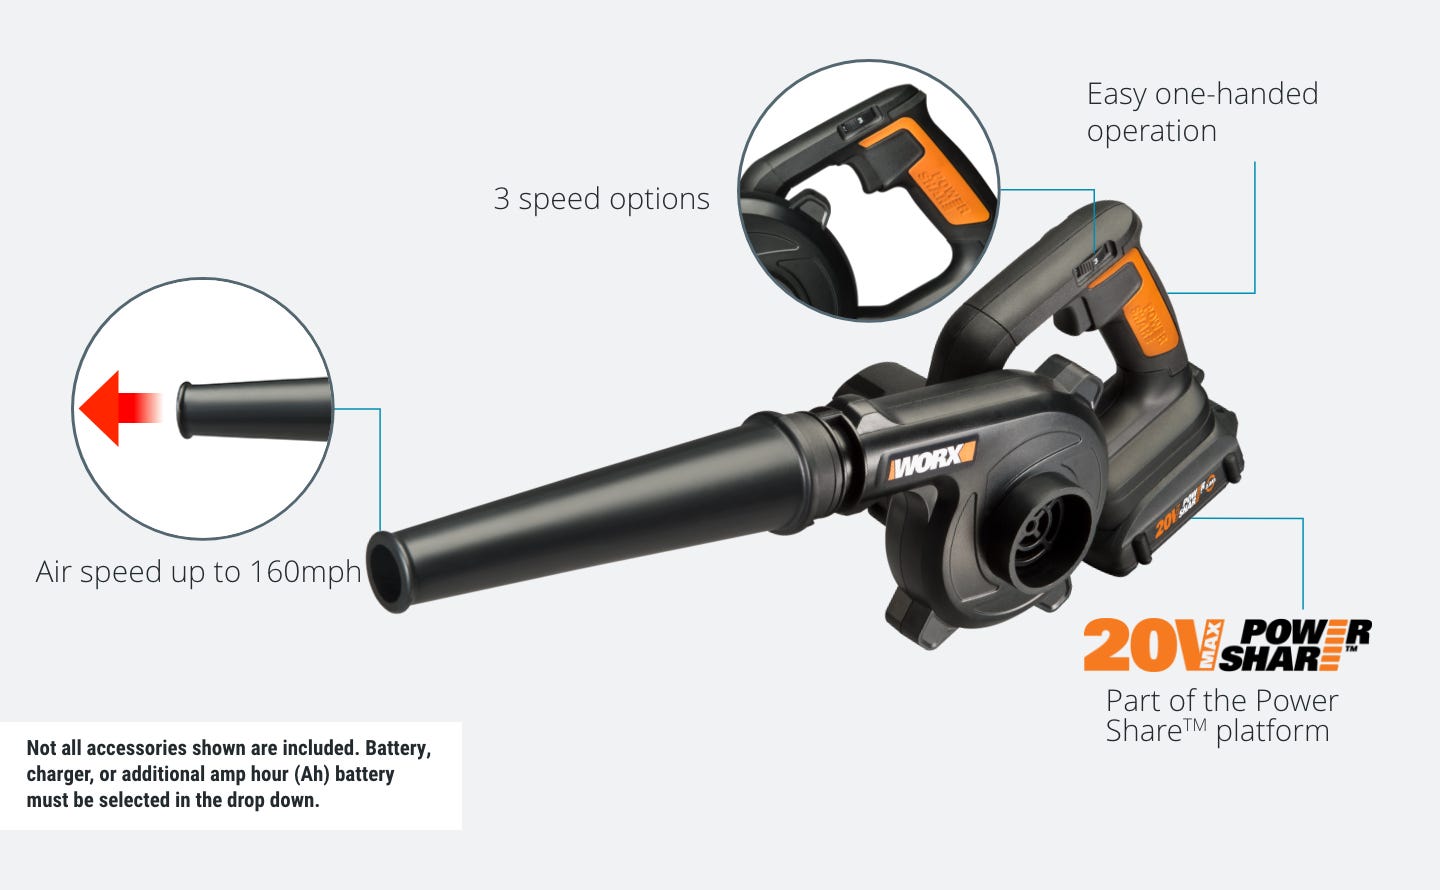 blower featuring: air speed up to 160 MPH, 3 speed options, easy one-handed operation, part of the power share platform